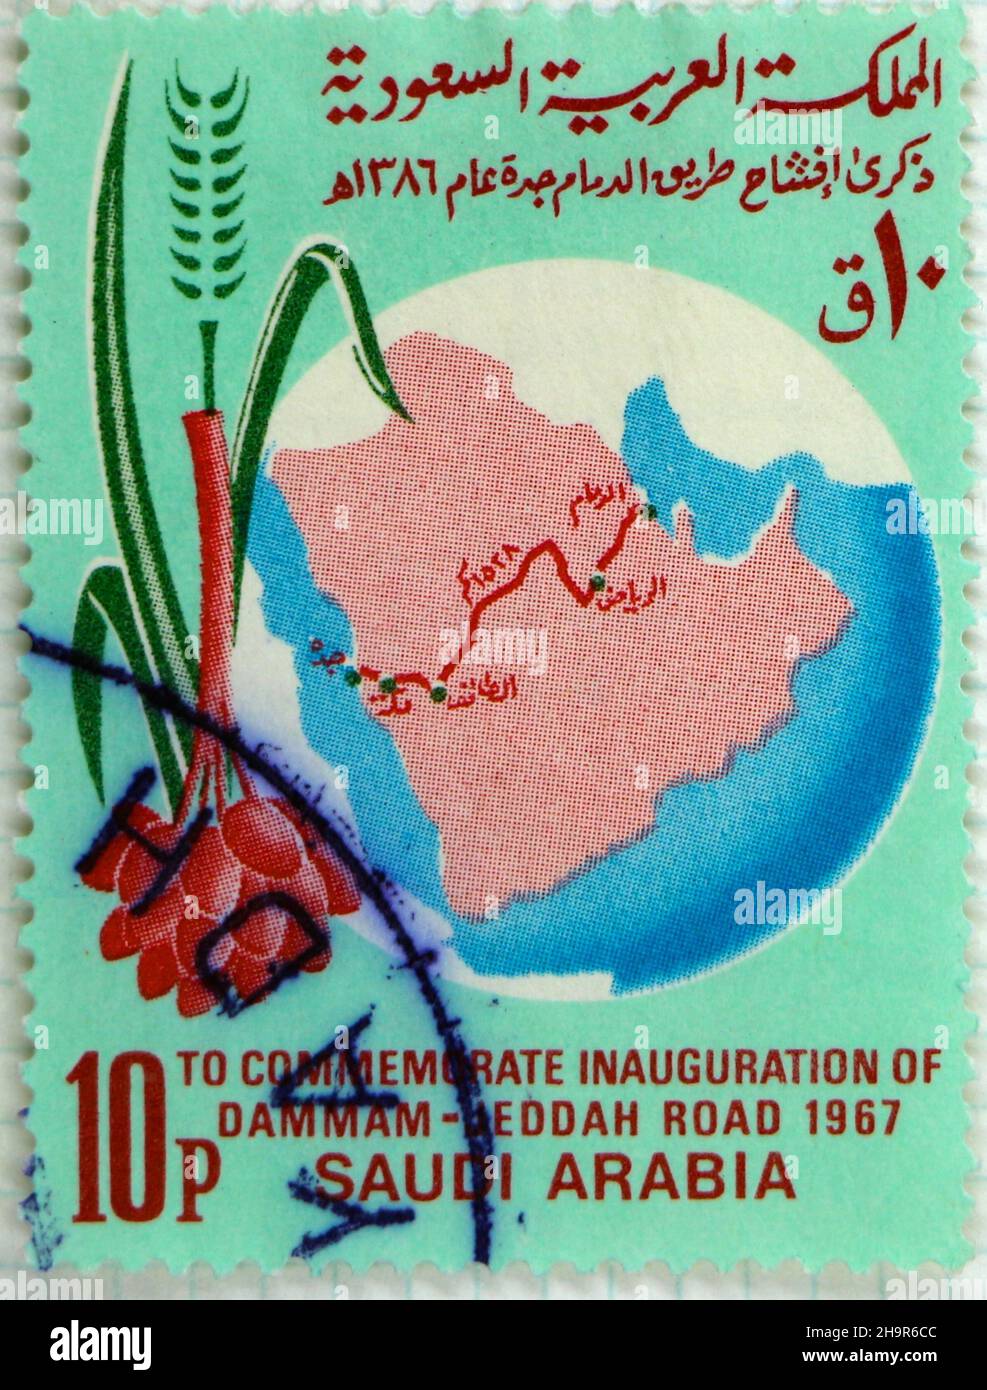 Photo of a postage stamp from Saudi Arabia to commemorate the inauguration of the Dammam Jeddah Road 1967 Stock Photo